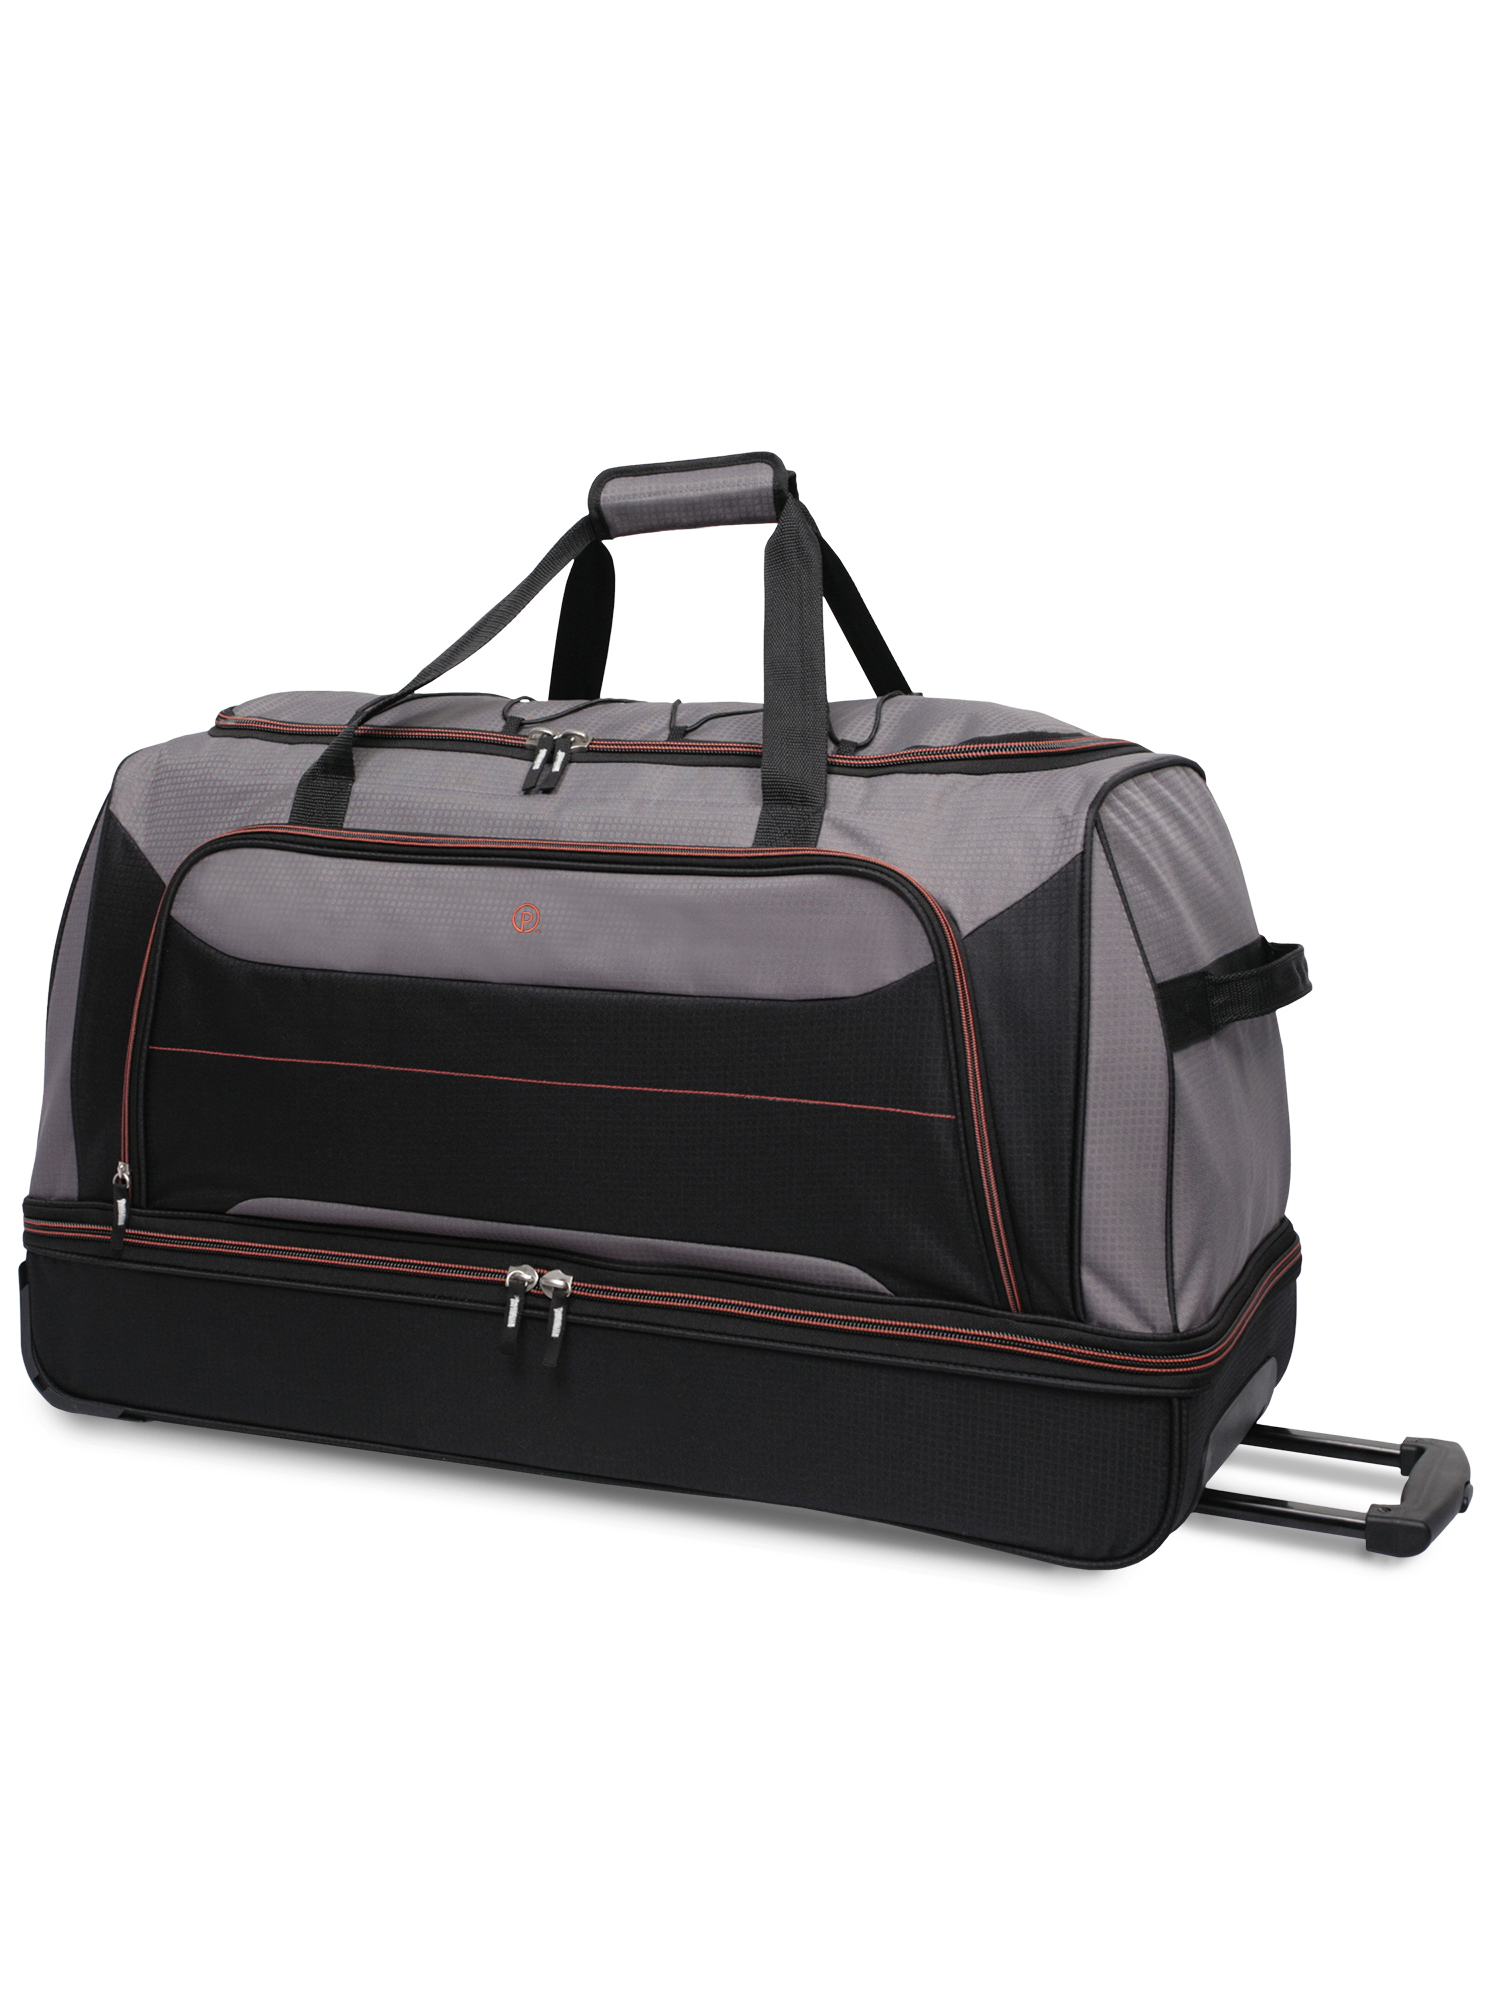 Protege Rolling Drop-Bottom Duffel Bag for Travel, 30 in, Black and Grey - image 2 of 8